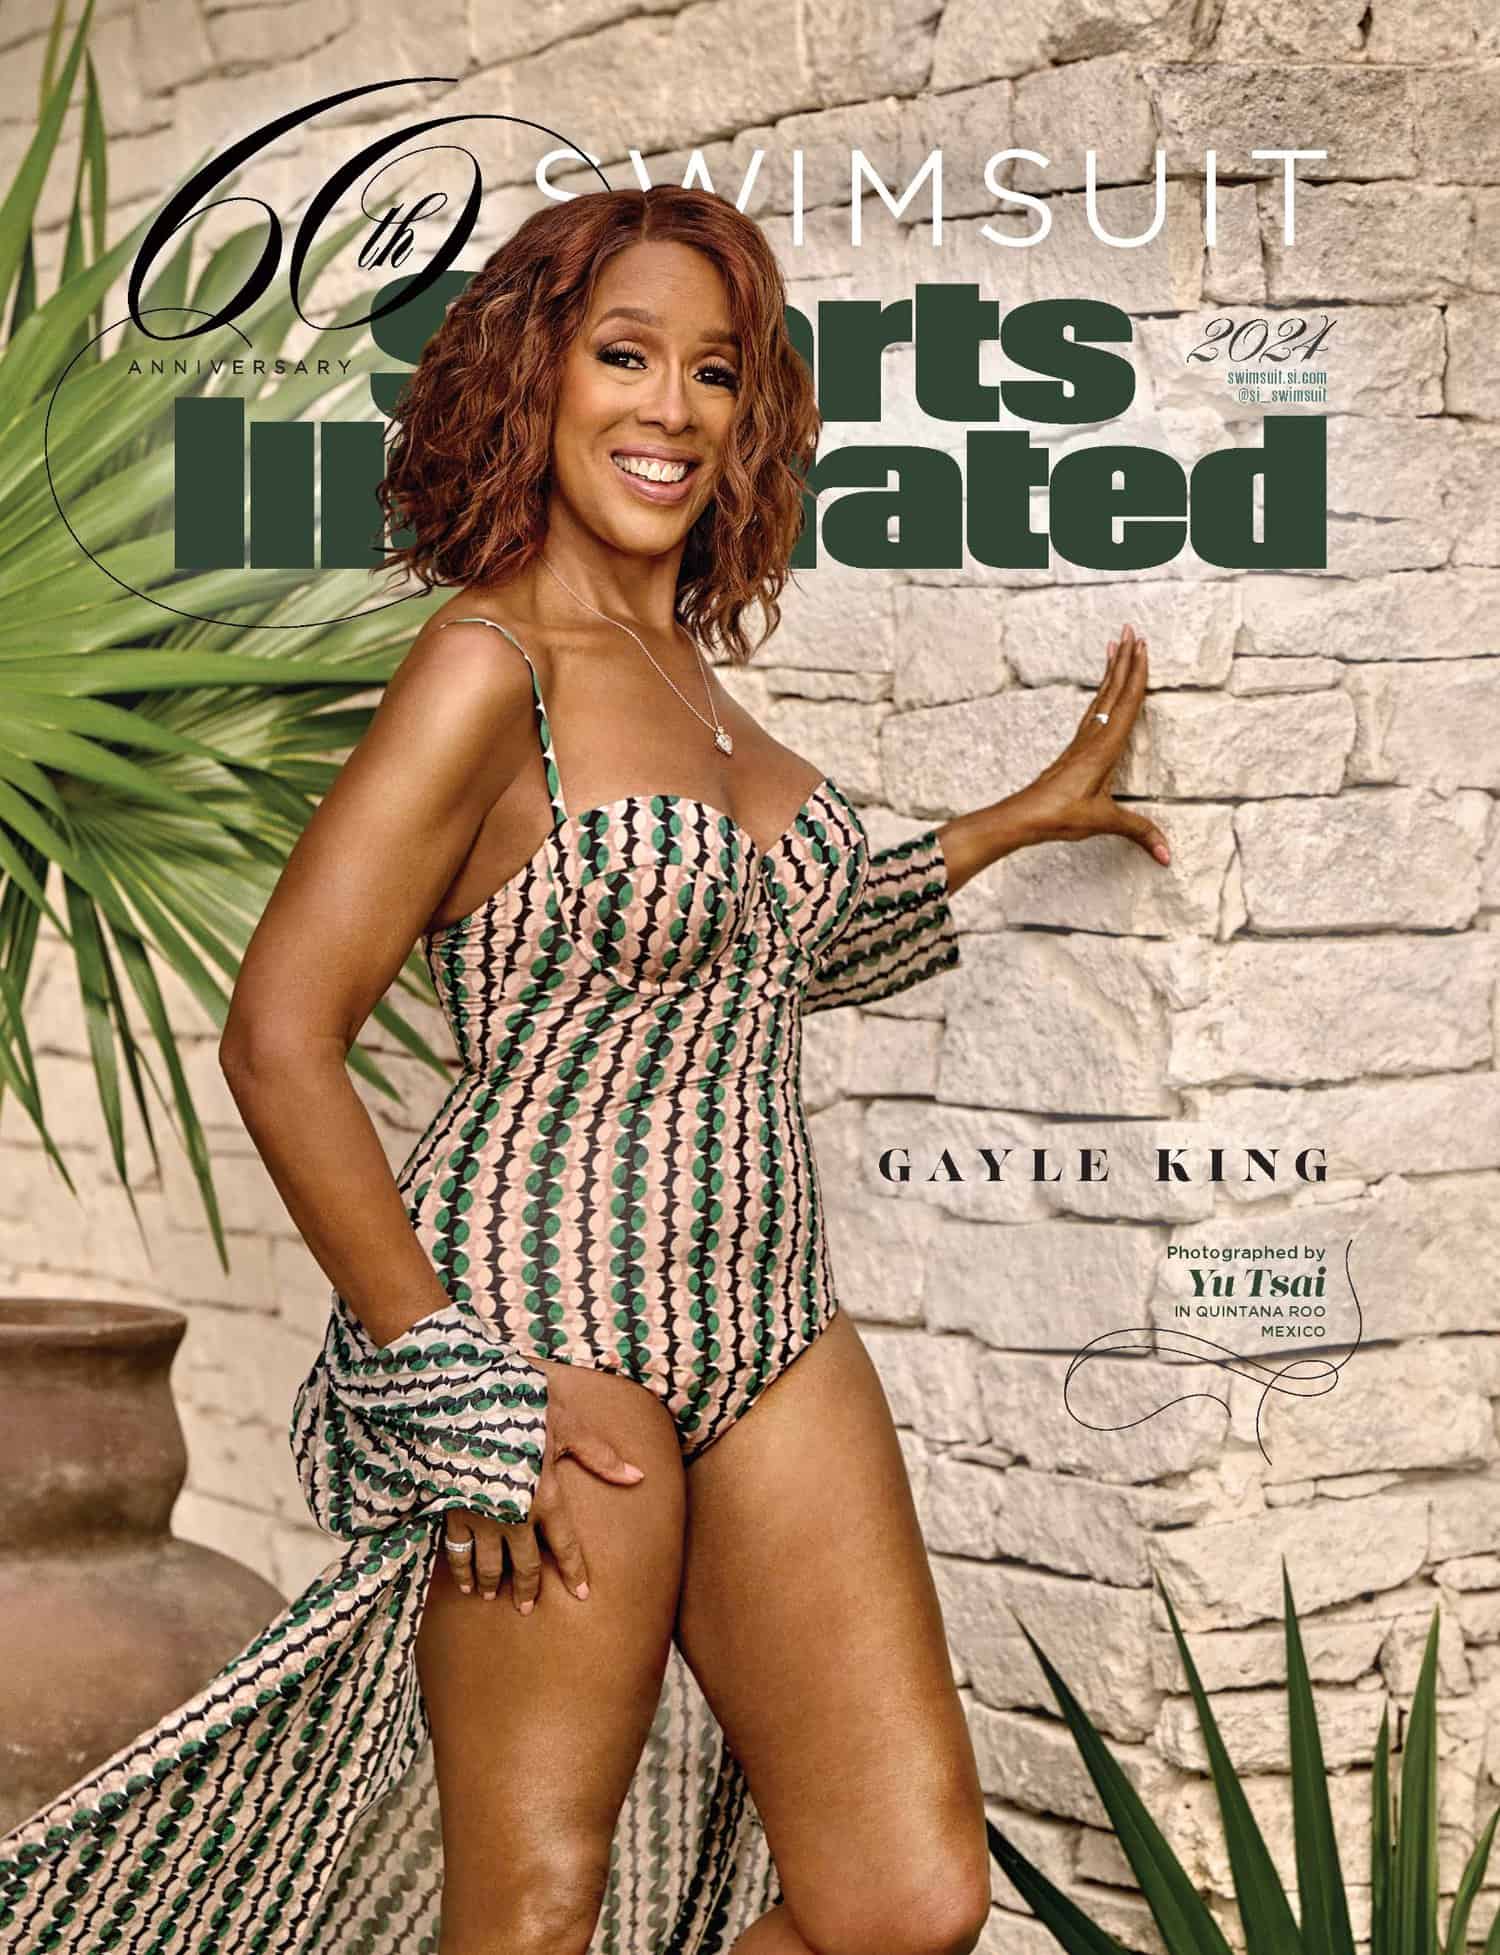 Sports Illustrated, Swimsuit Issue, Sports Illustrated Swimsuit issue, models, covers, anniversary, Gayle King